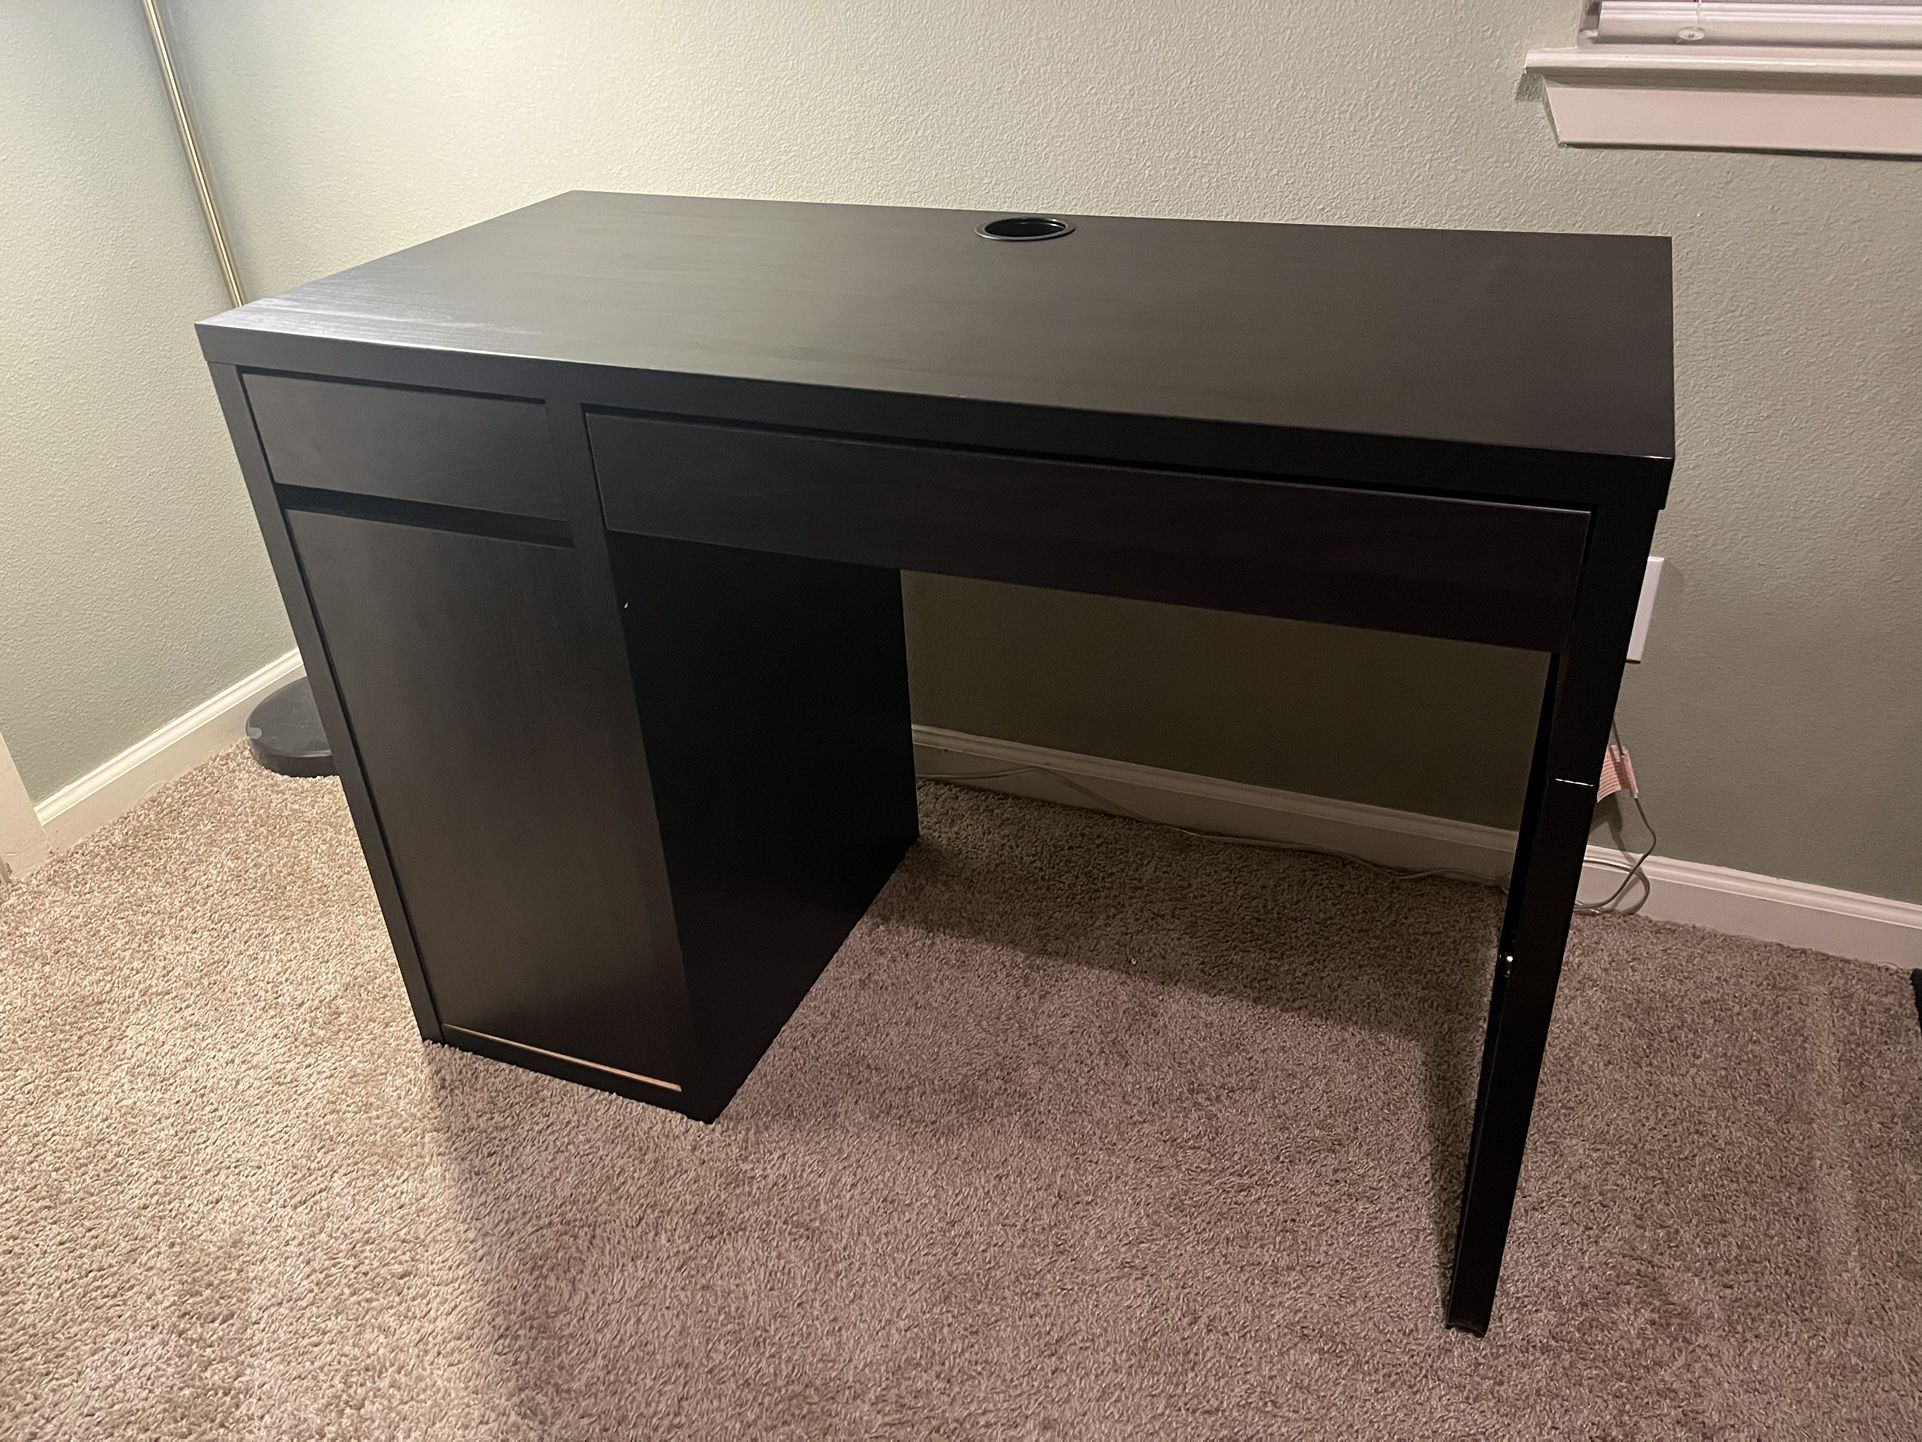 Black IKEA Office Desk With Drawers